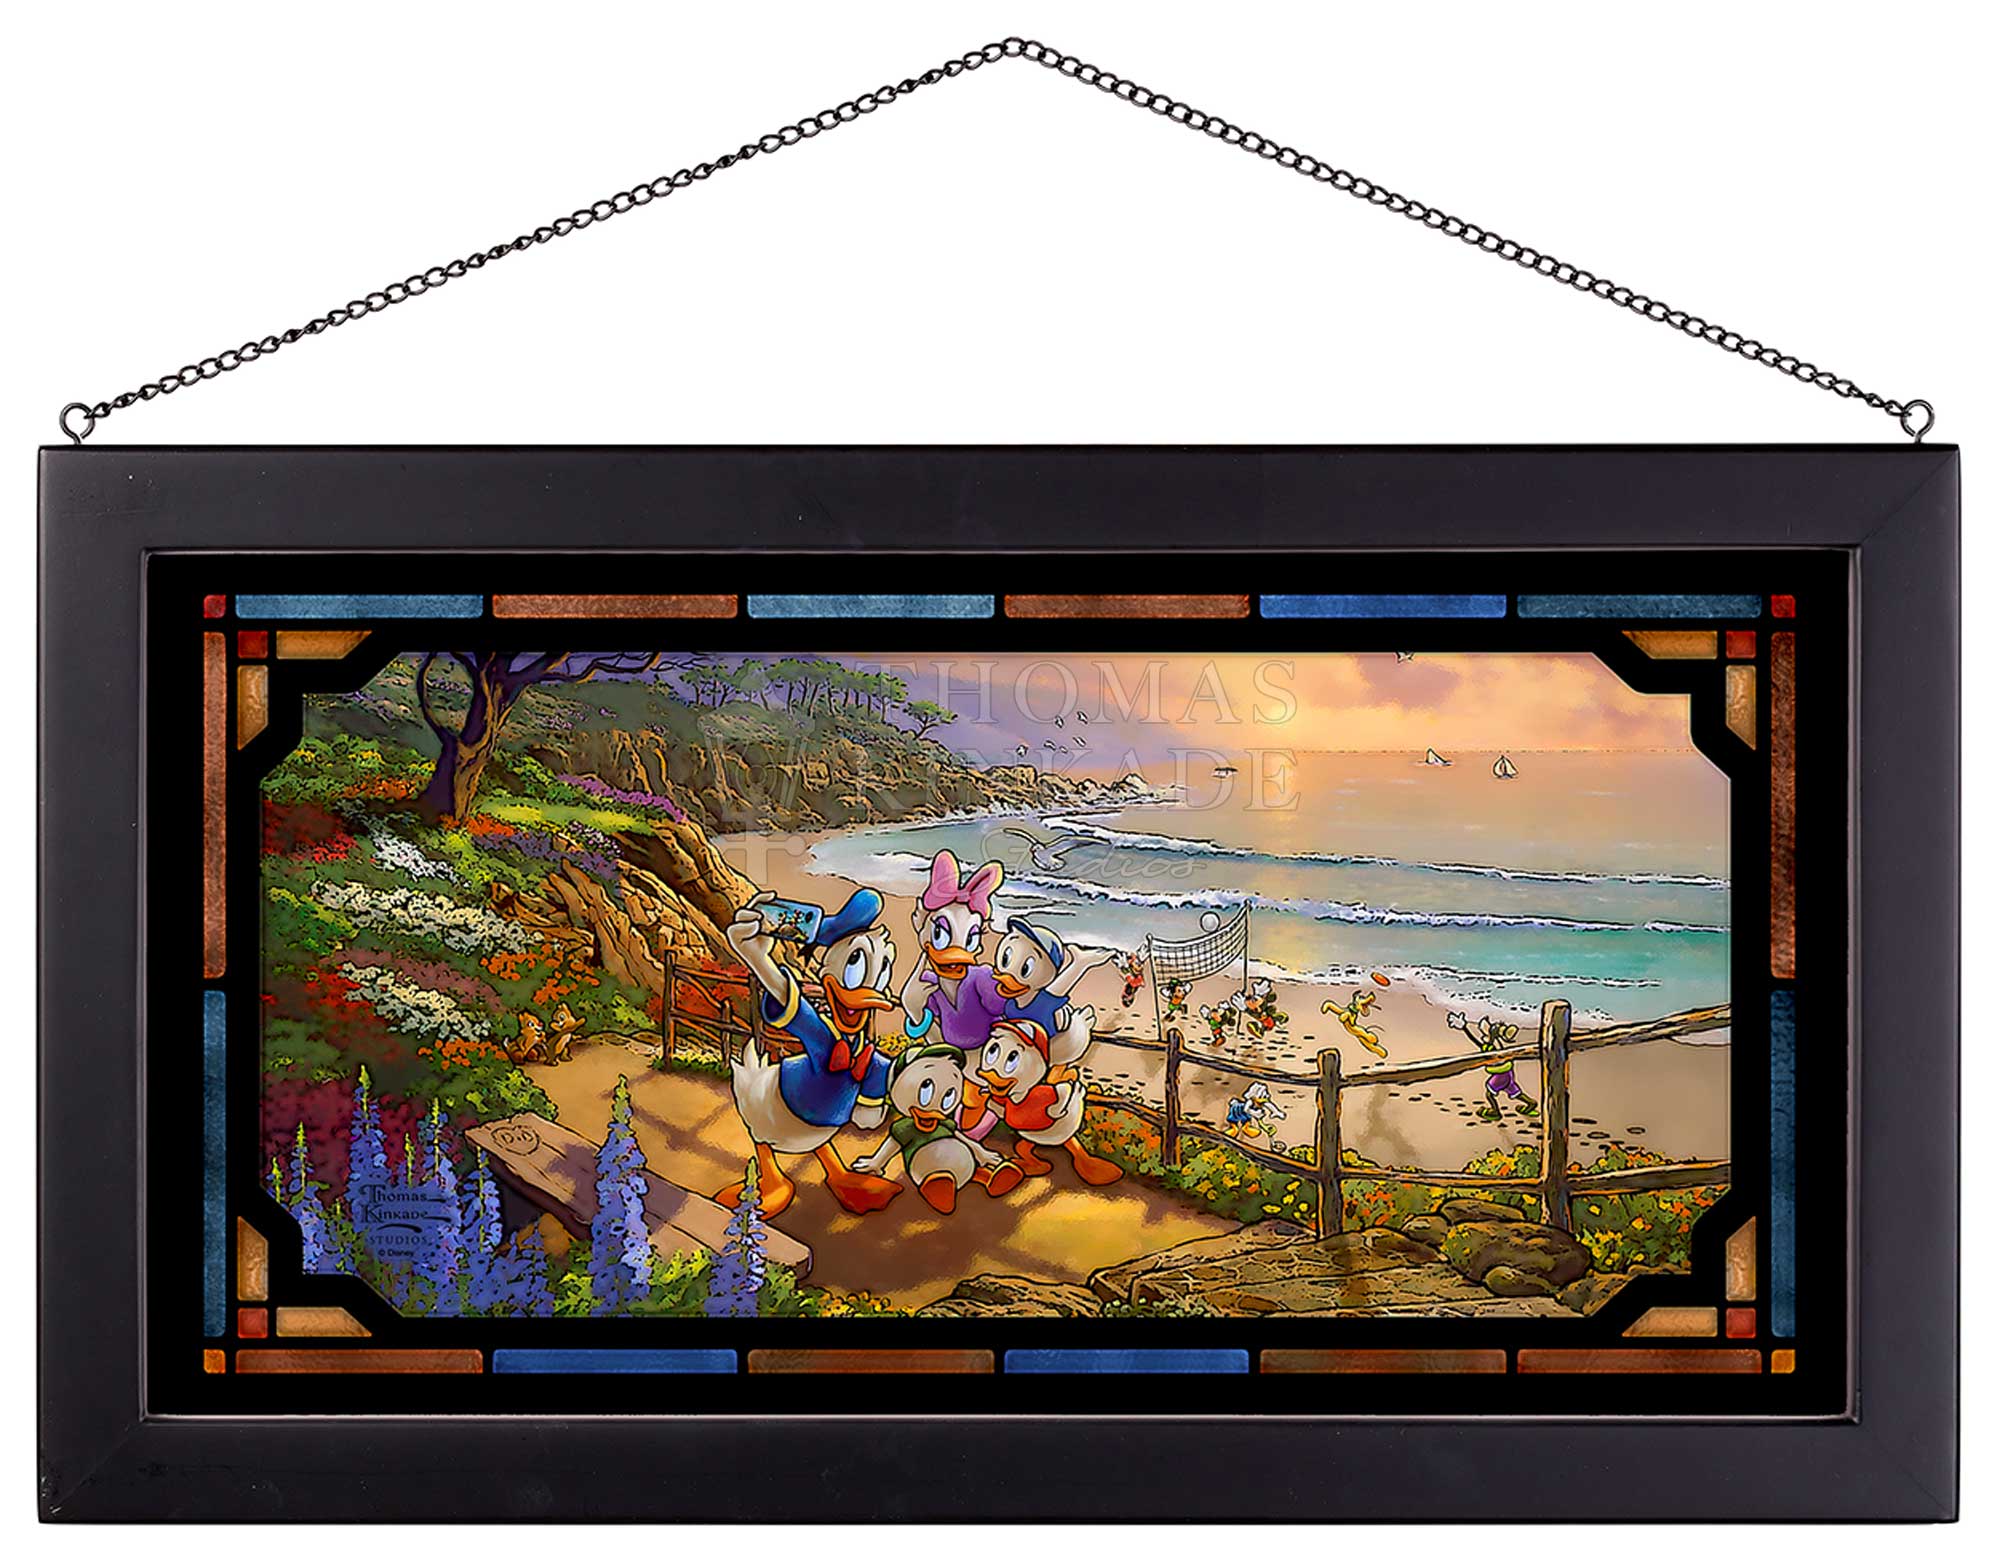 A bright sunshine highlights the coastal adventures of Donald Duck, Daisy Duck, and some of their dearest friends. Inspired by Thomas Kinkade Studios Friendship Moments Series.